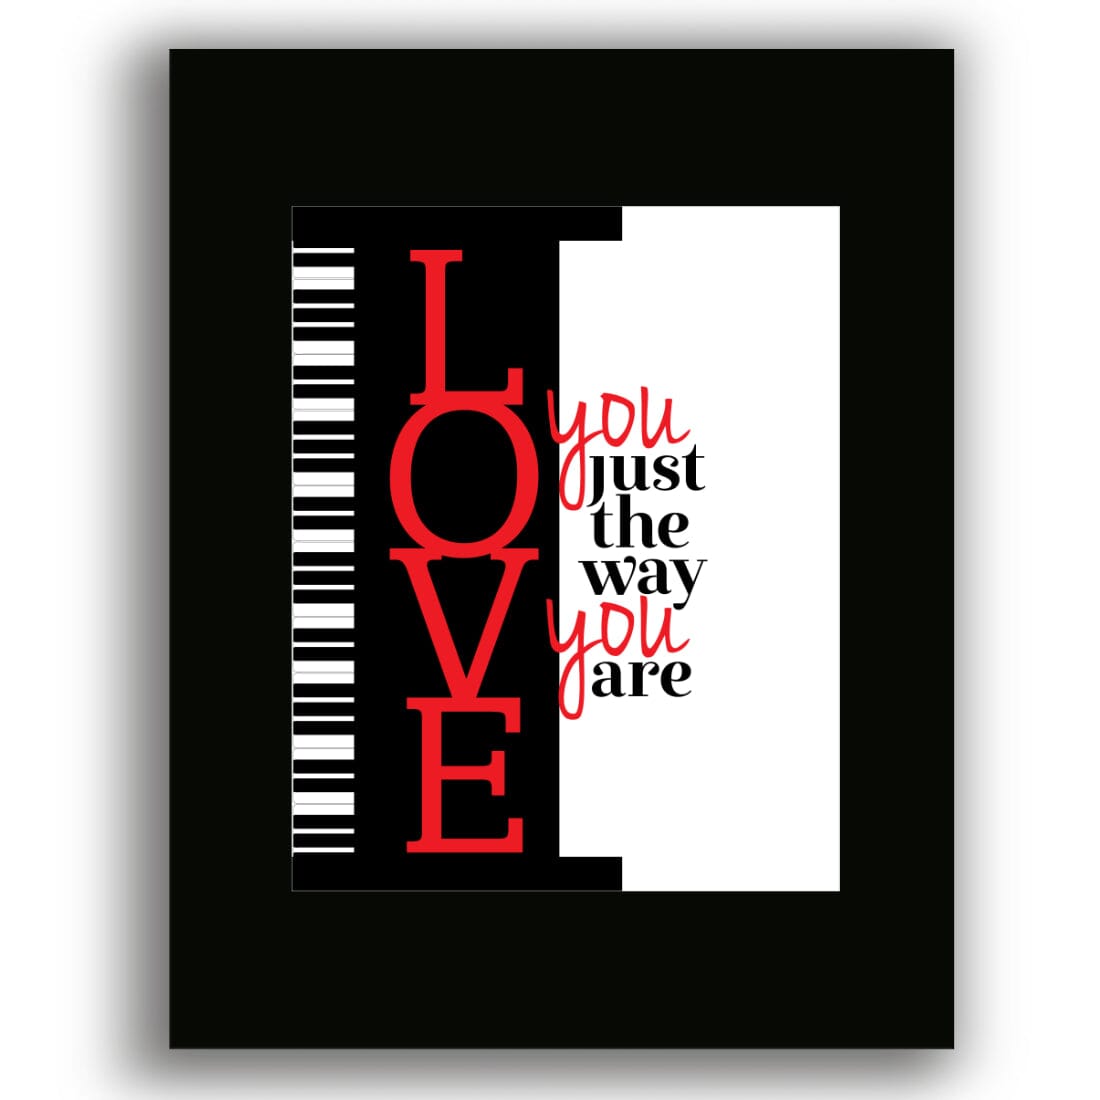 I Love You Just the Way You Are by Billy Joel - Lyrics Art Song Lyrics Art Song Lyrics Art 8x10 Black Matted Print 